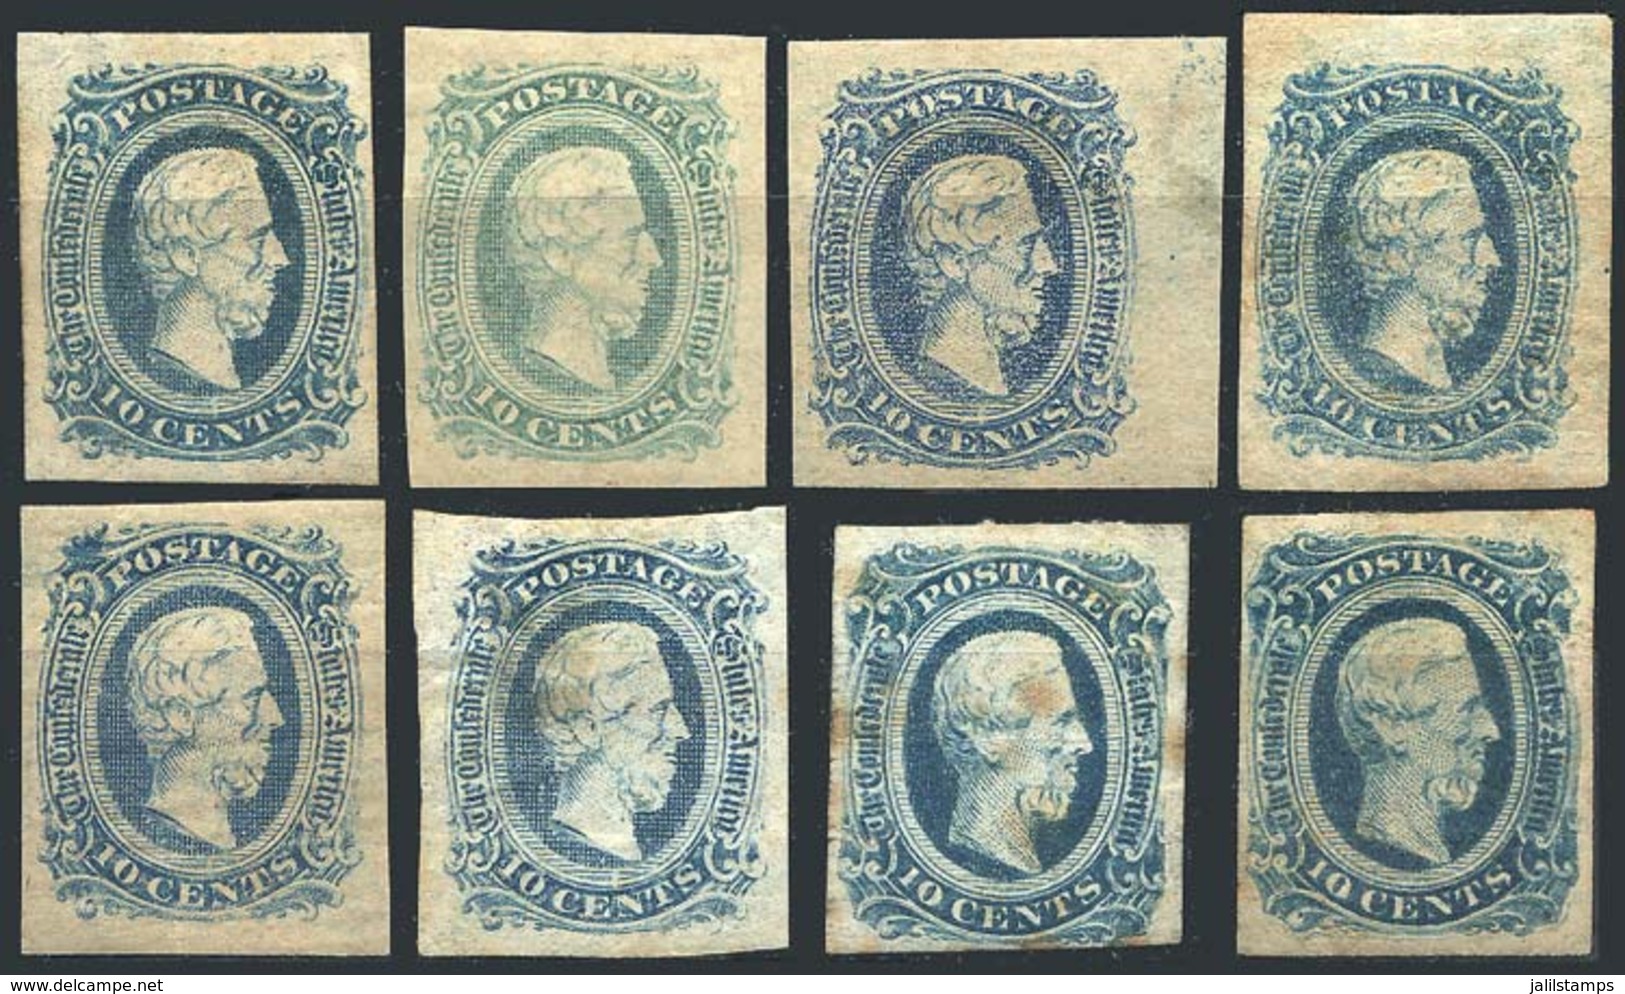 UNITED STATES: Sc.11 (x6, Different Colors) + 12 (x2), 5 With Original Gum, The Rest Without Gum. Most Of Fine To VF Qua - 1861-65 Confederate States